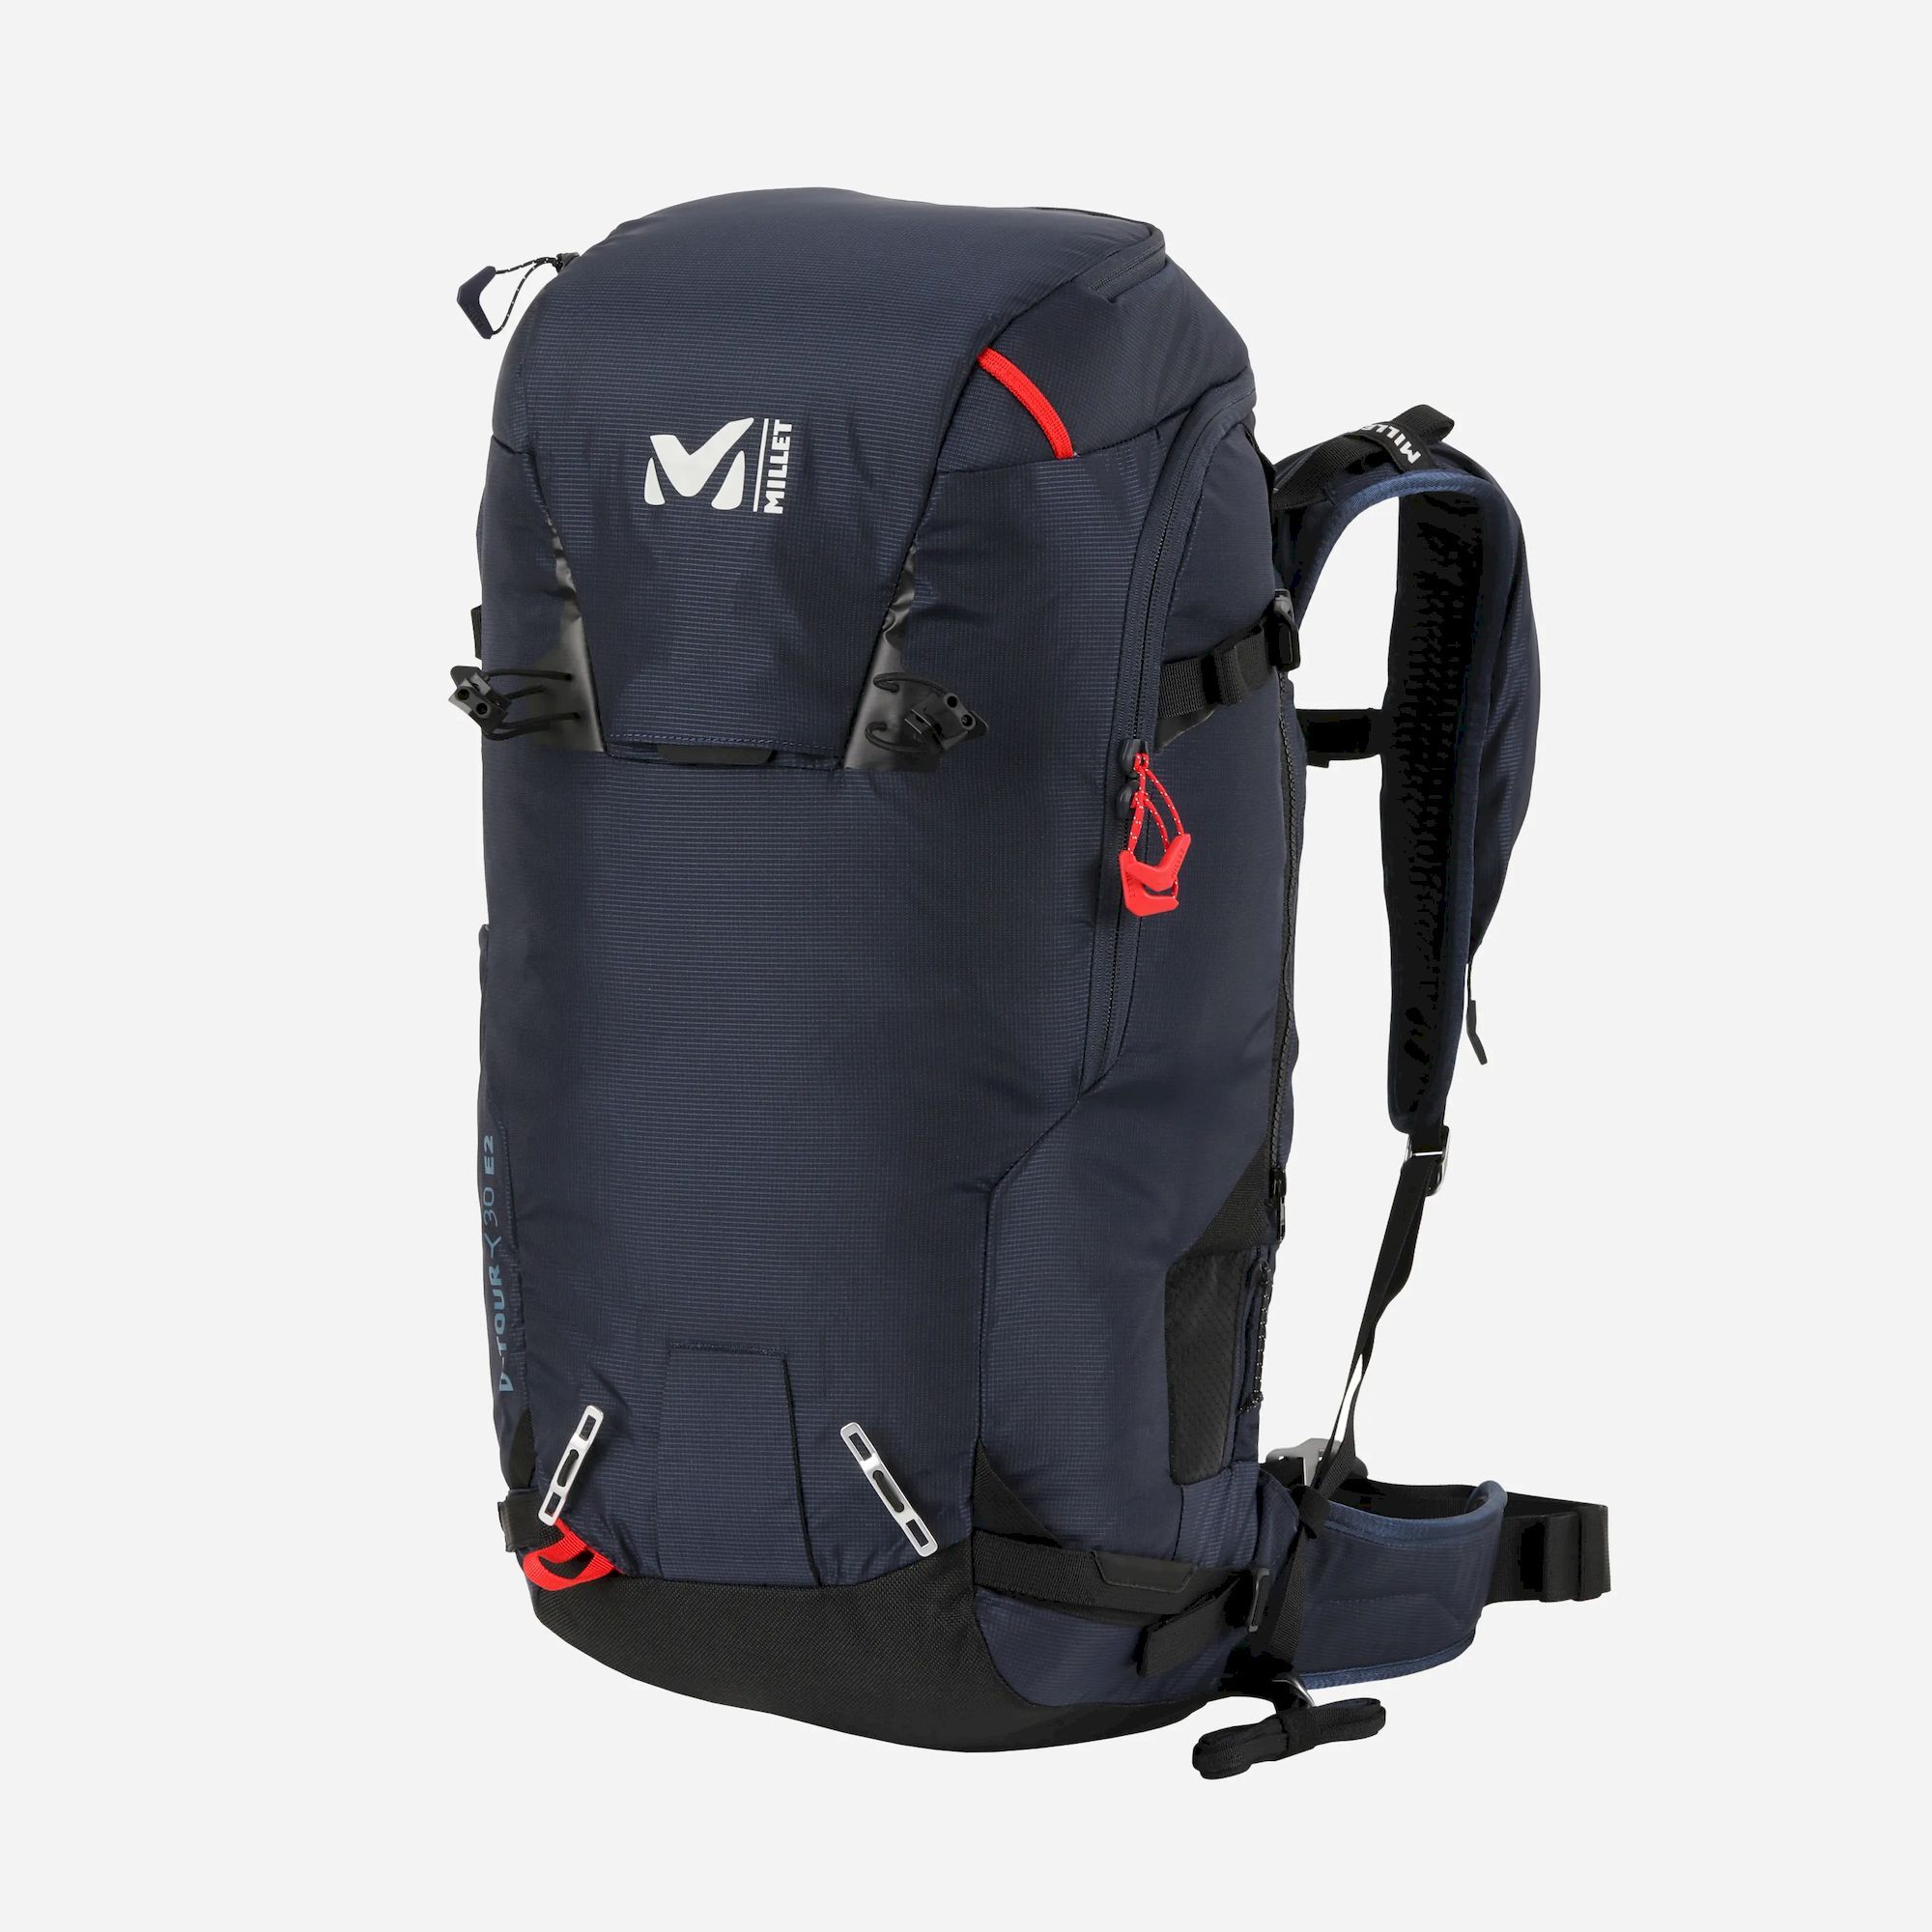 Millet D-Tour 30 E2 - Avalanche airbag backpack | Hardloop